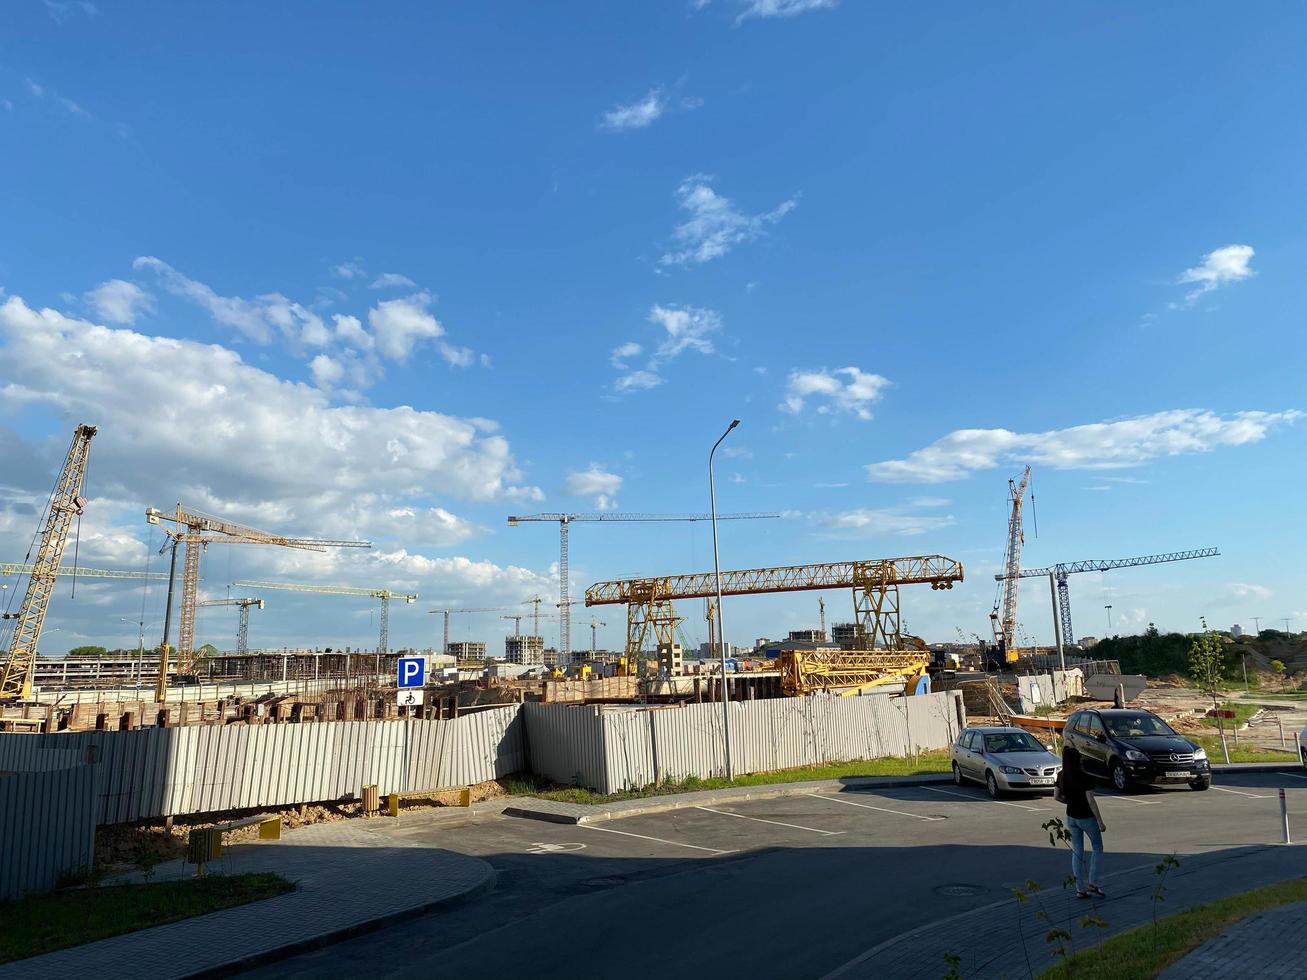 building under construction with concrete formwork, scaffolding, struts, safety nets, workers and with a yellow steel crane on a background of blue sky with traces of clouds photo